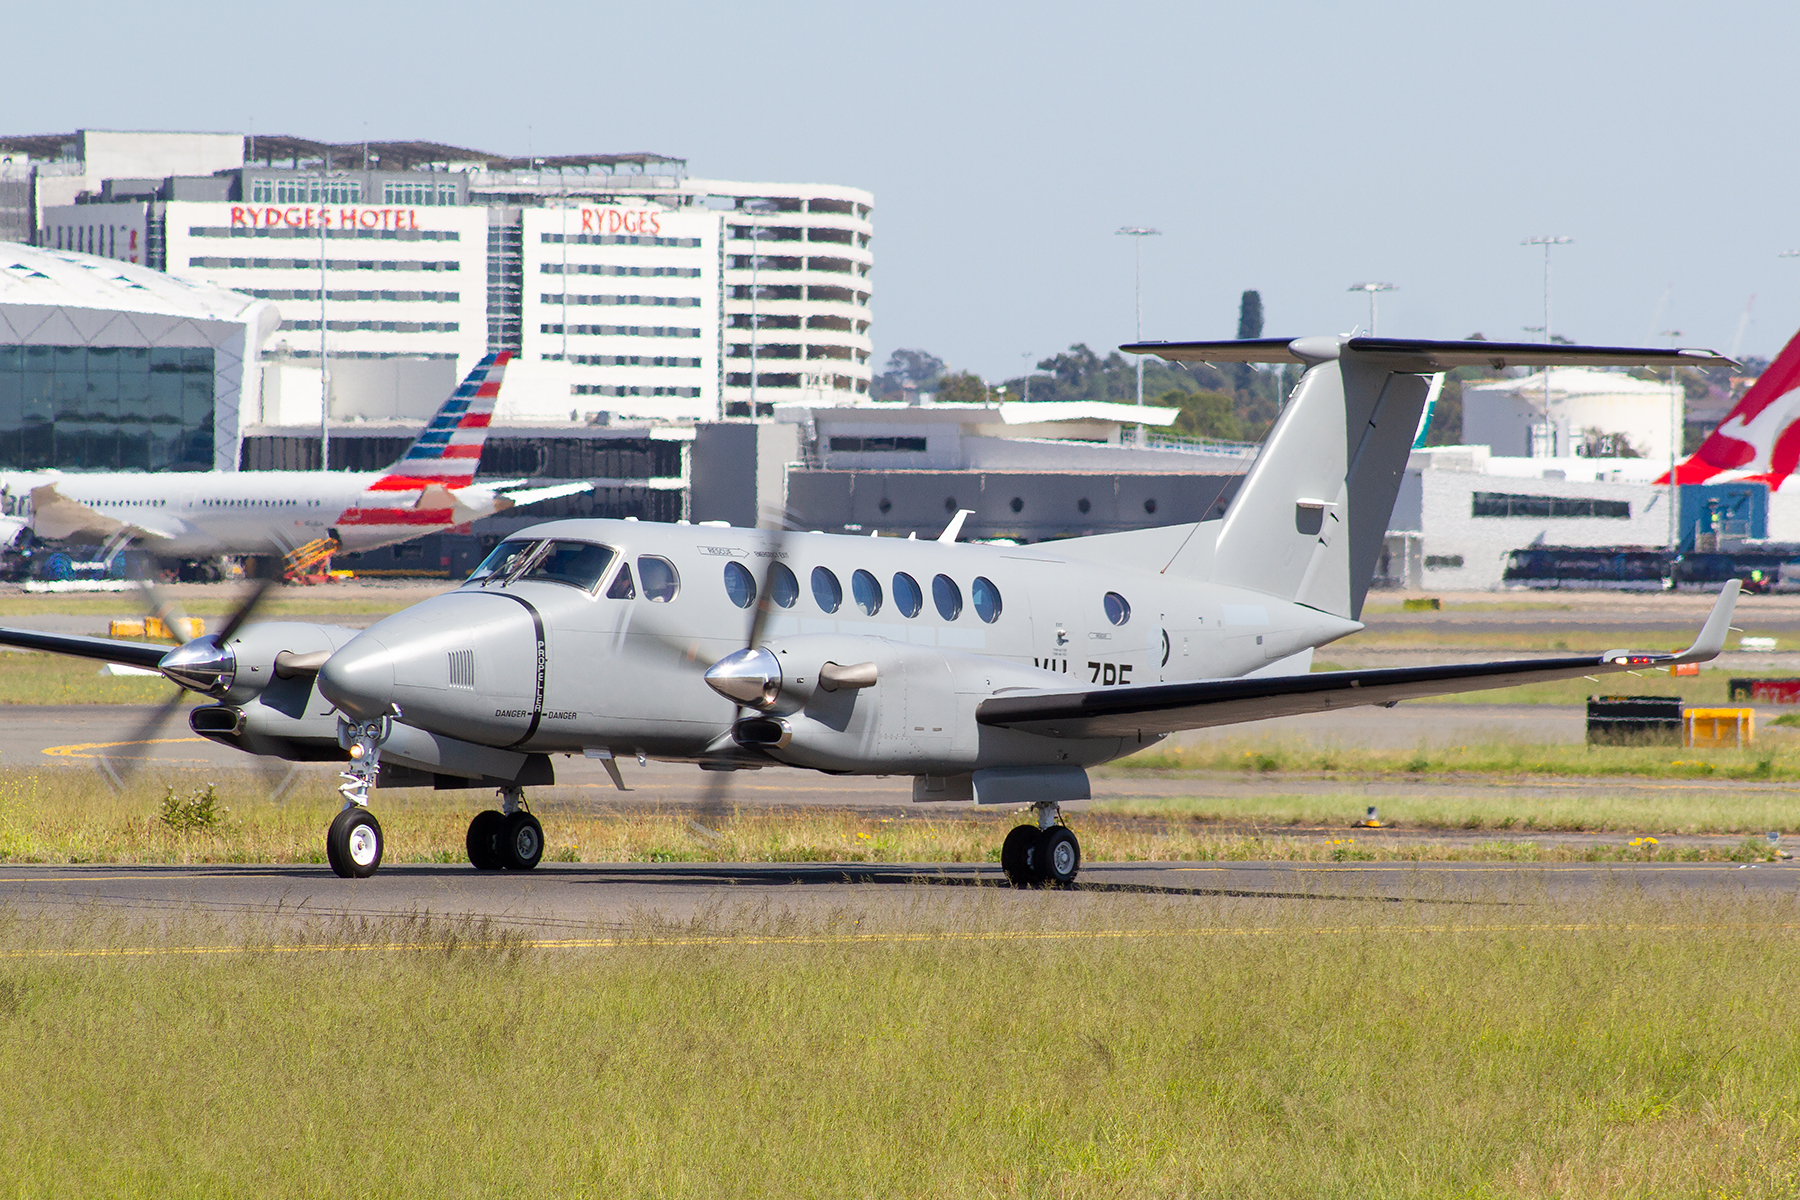 Hawker Pacific (Pty) Beech King Air 350 VH-ZPE at Kingsford Smith